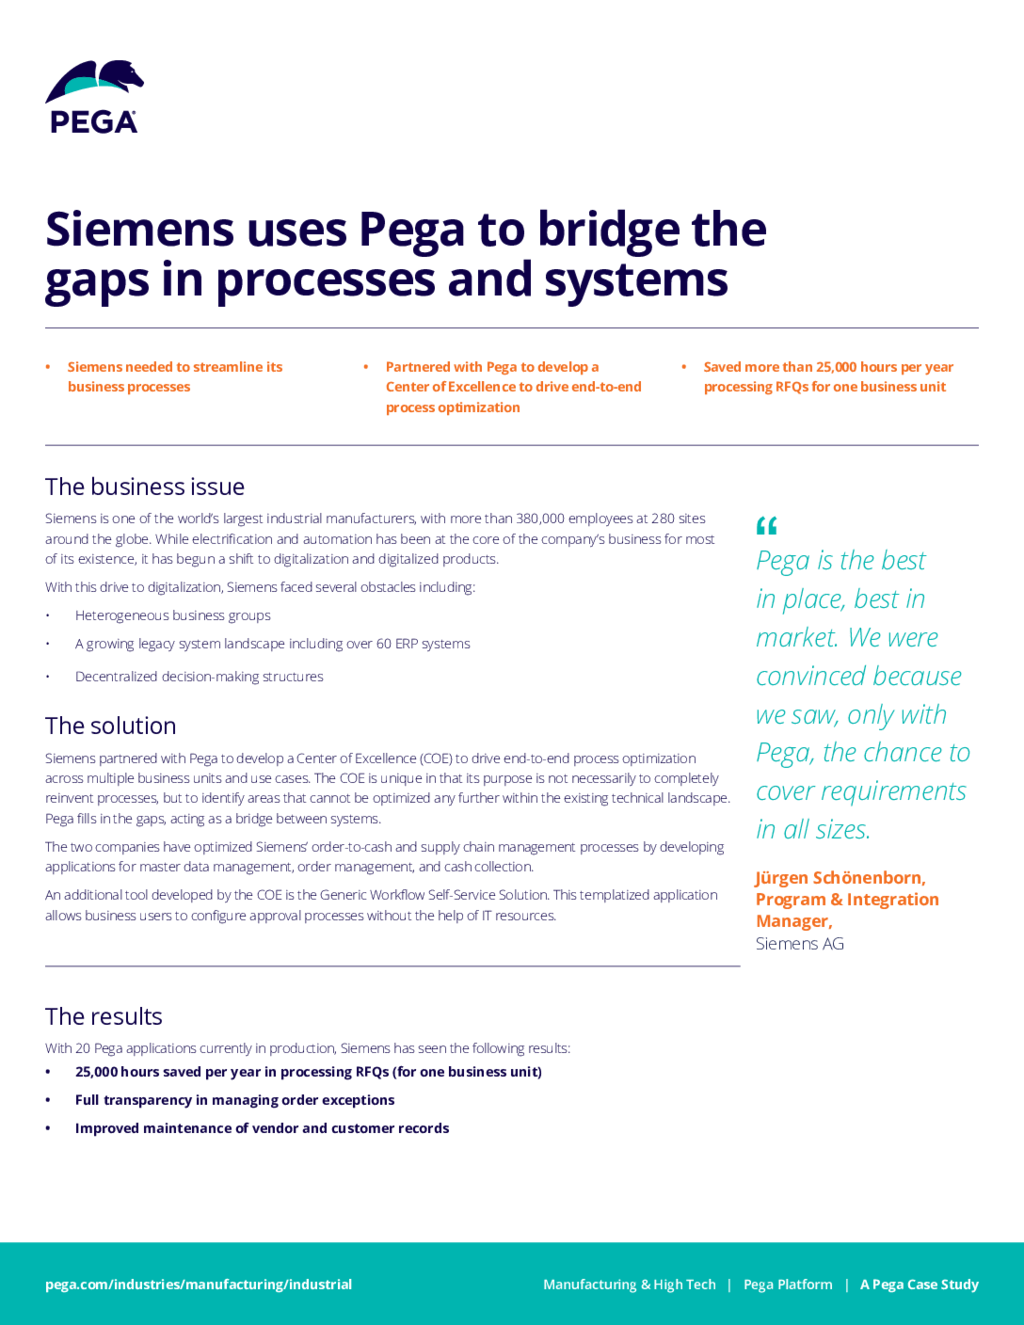 Siemen's saved 25,000 hours a year in processing RFQS